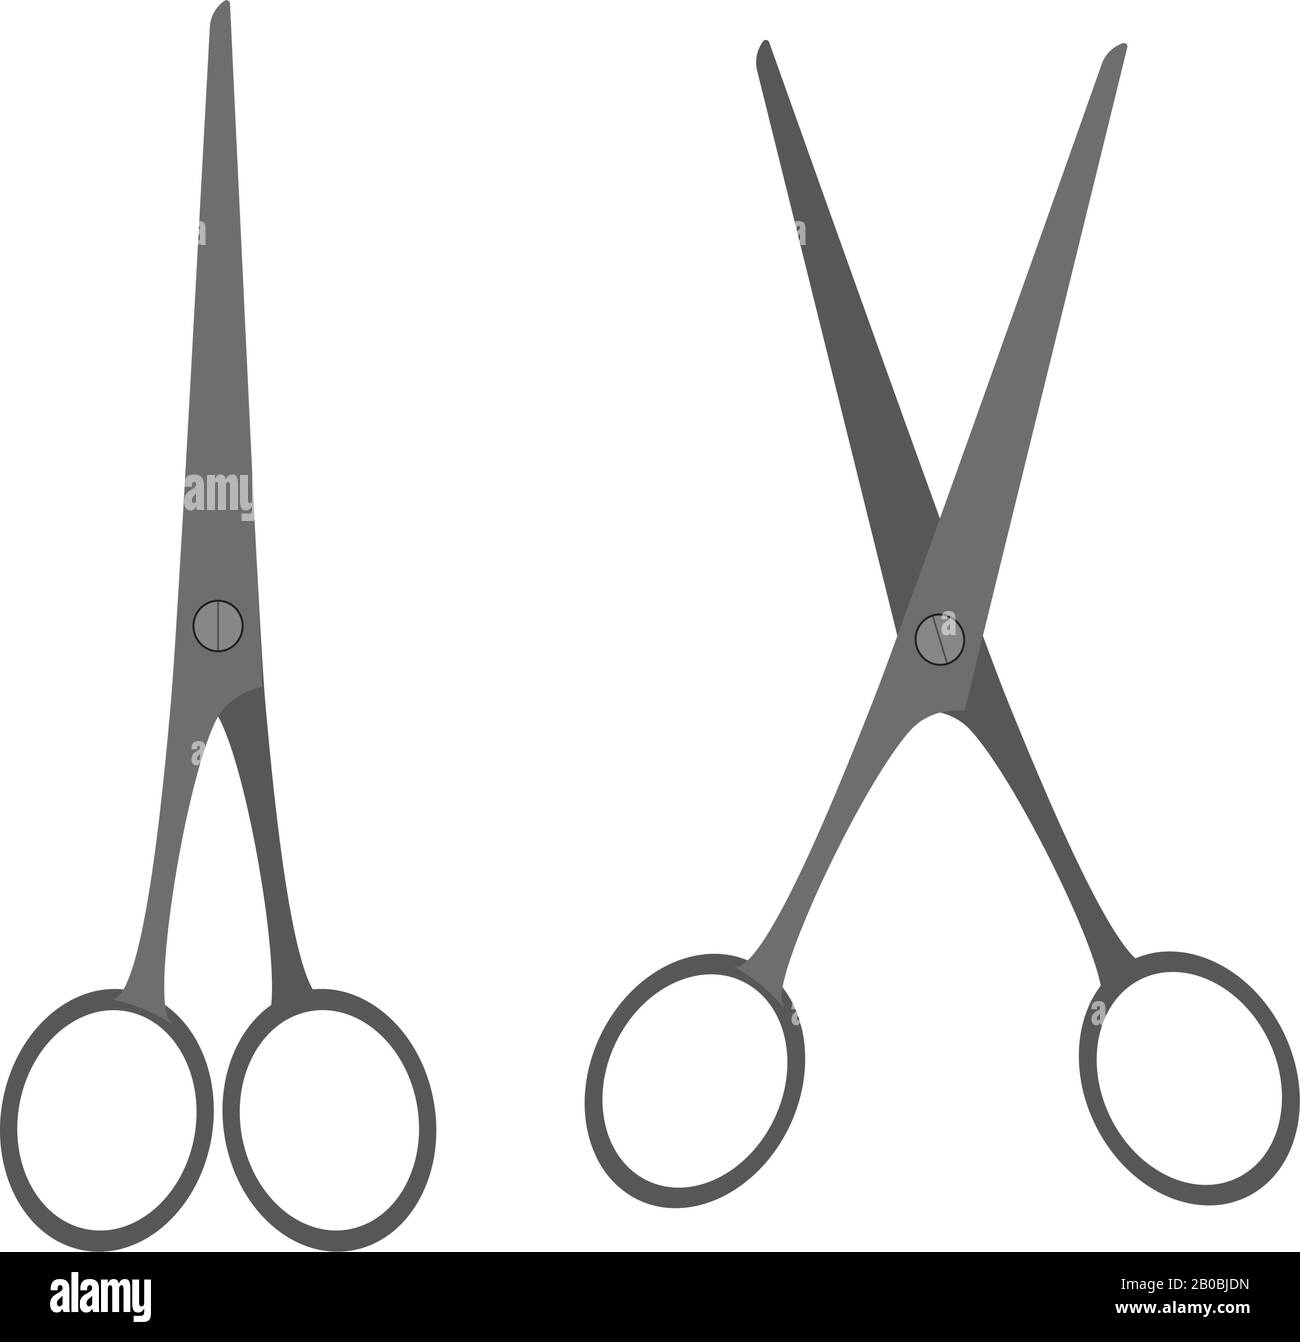 Hairdresser scissors flat icon. Open and closed hair cut tool. Stock Vector